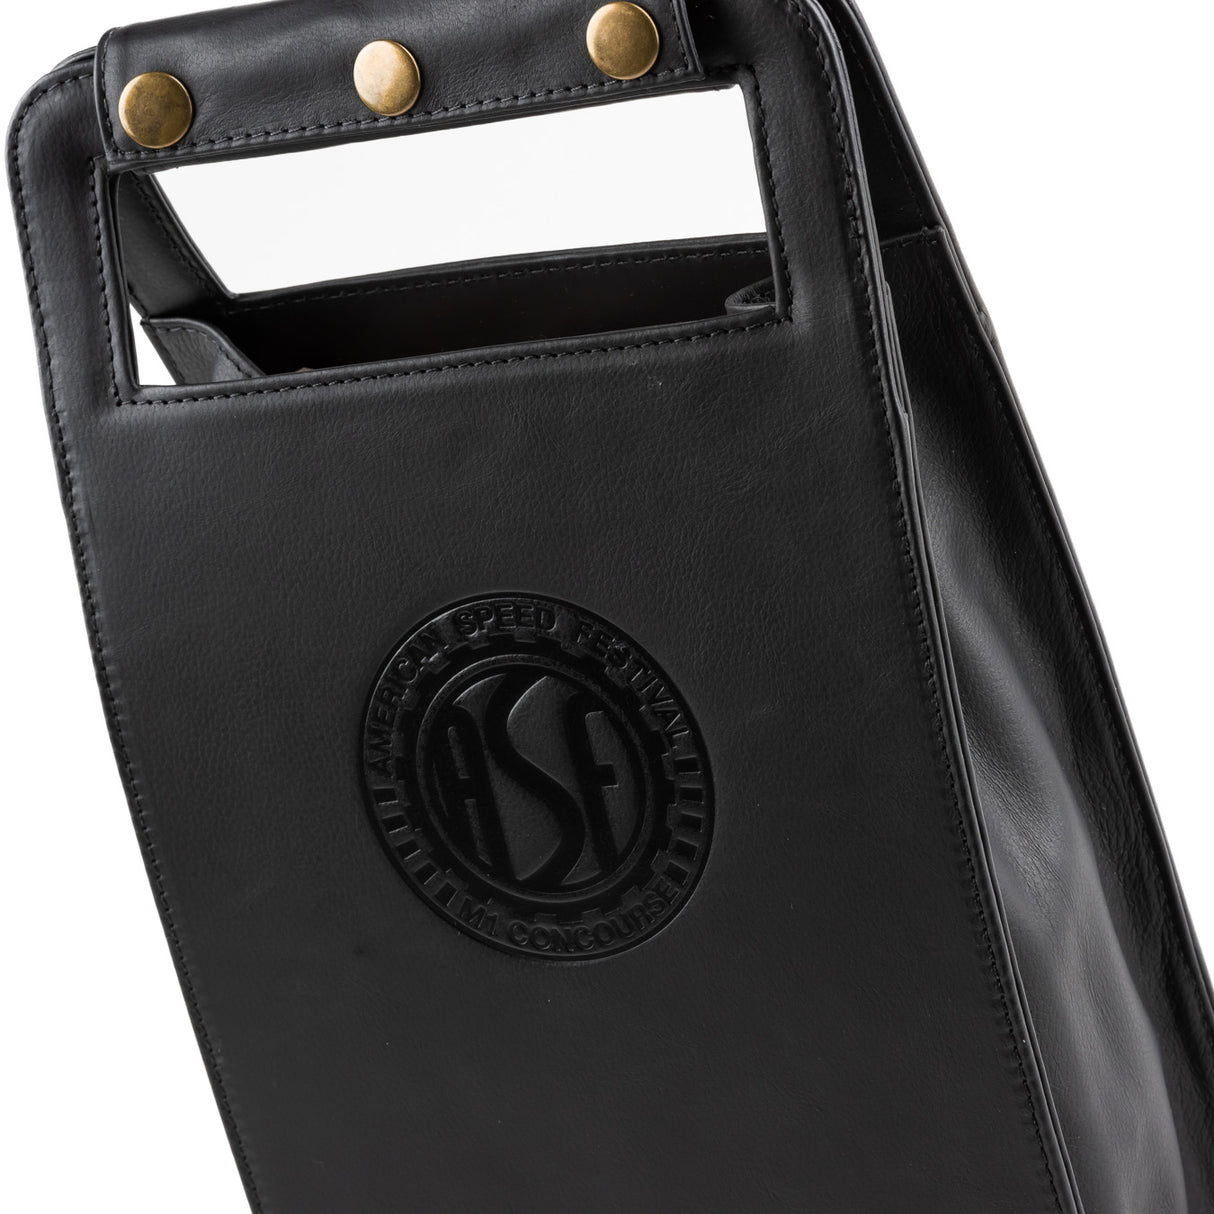 American Speed Festival Logo Leather Wine Carrier